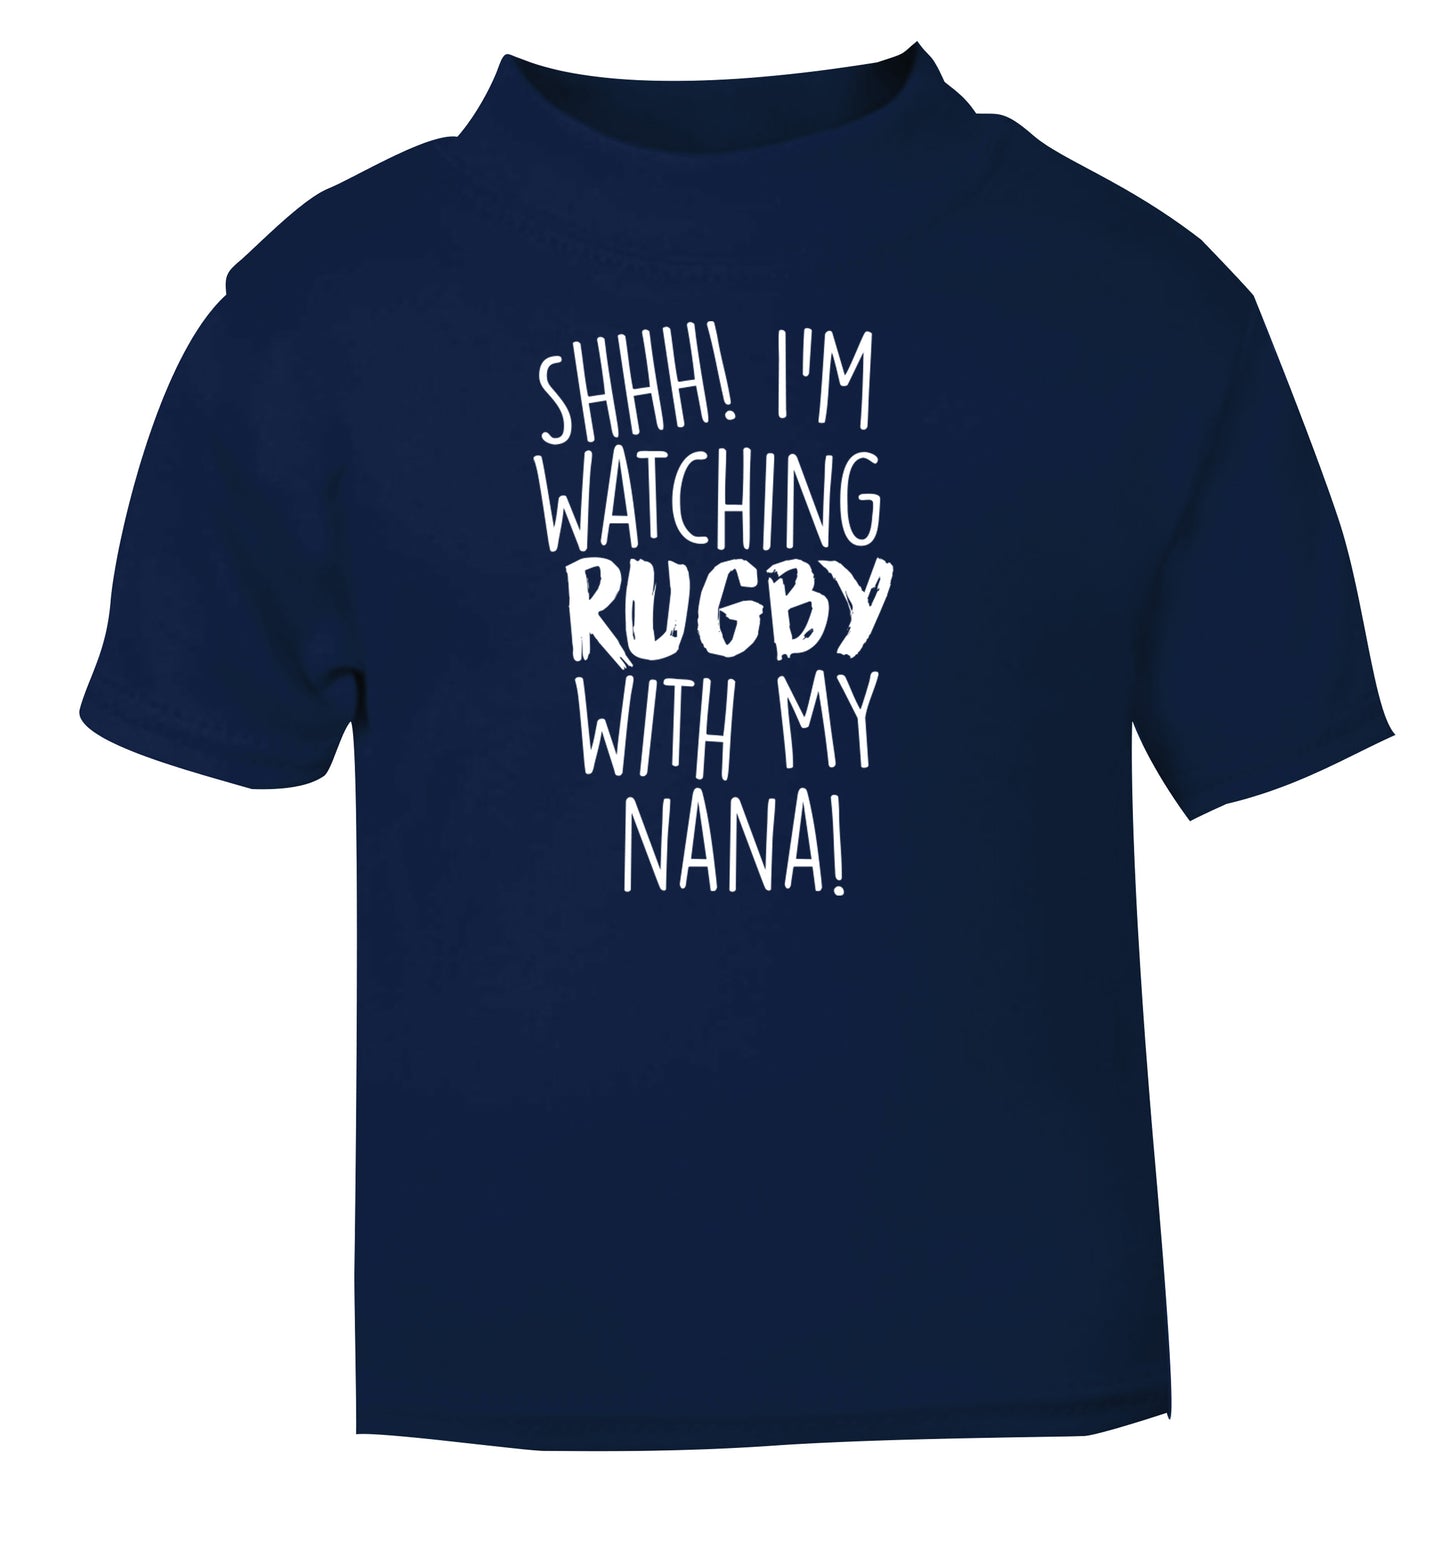 Shh I'm watching rugby with my nana navy Baby Toddler Tshirt 2 Years